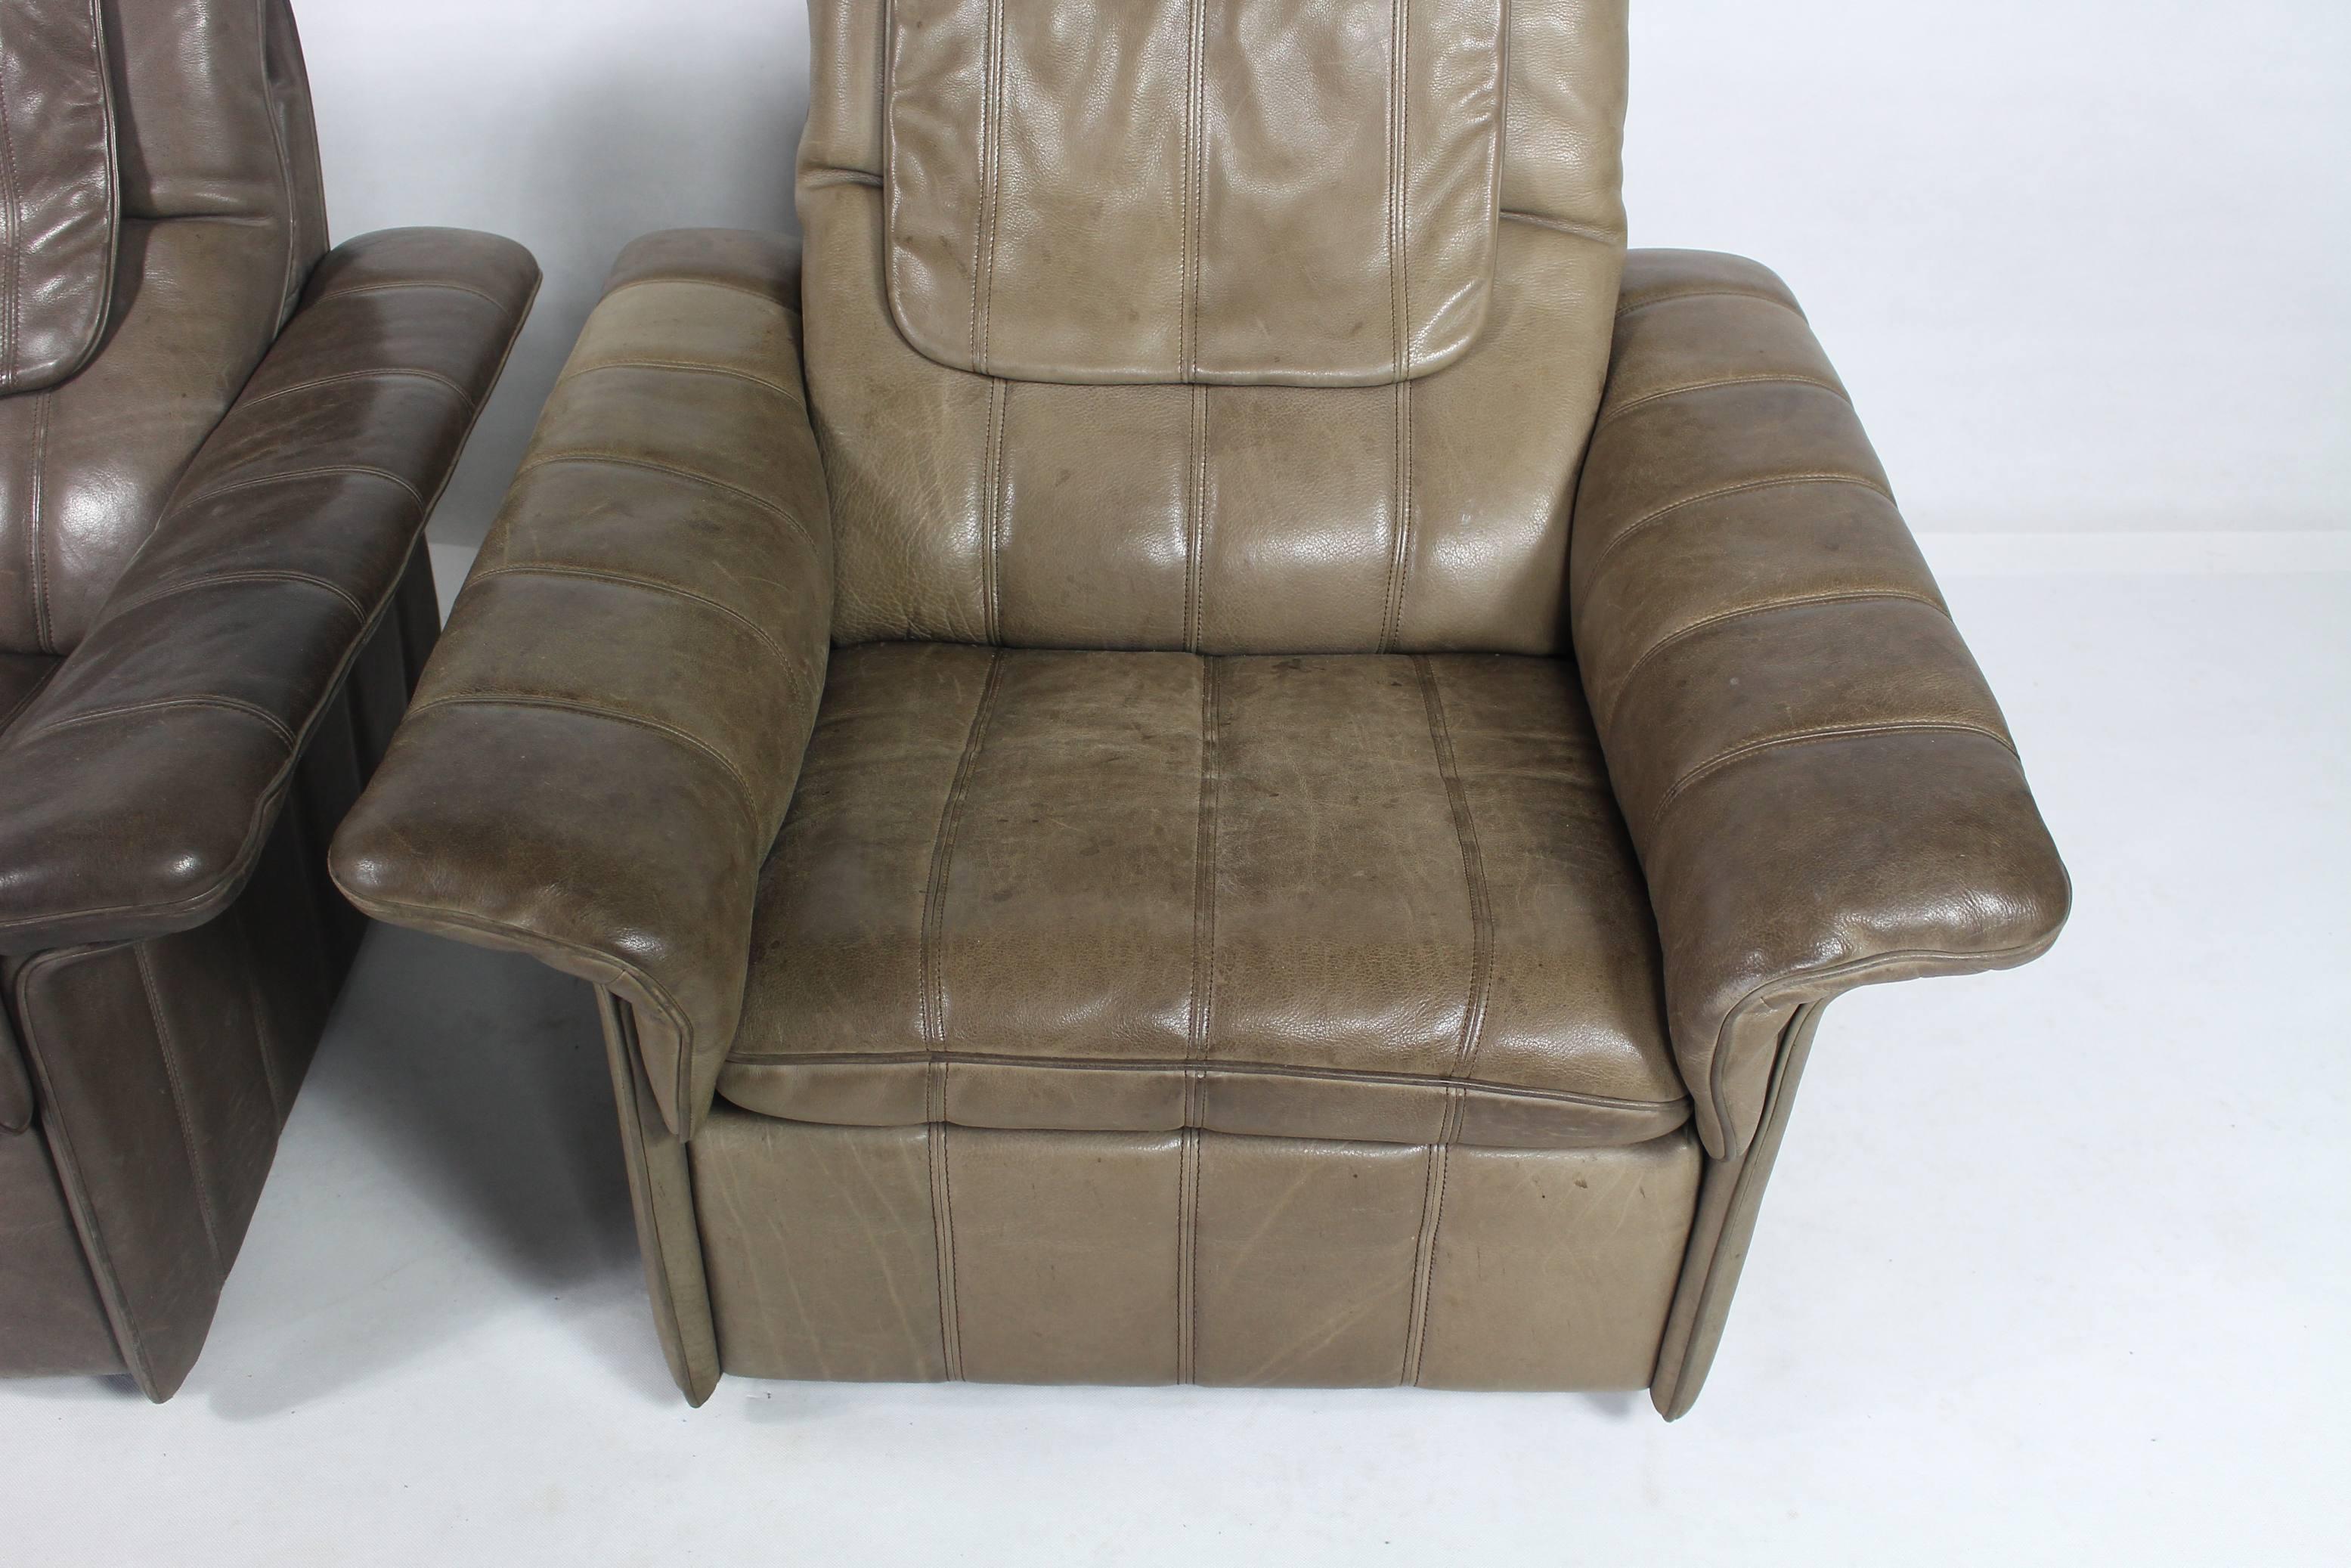 Buffalo Leather Lounge Chair by De Sede of Switzerland, 1970s For Sale 5